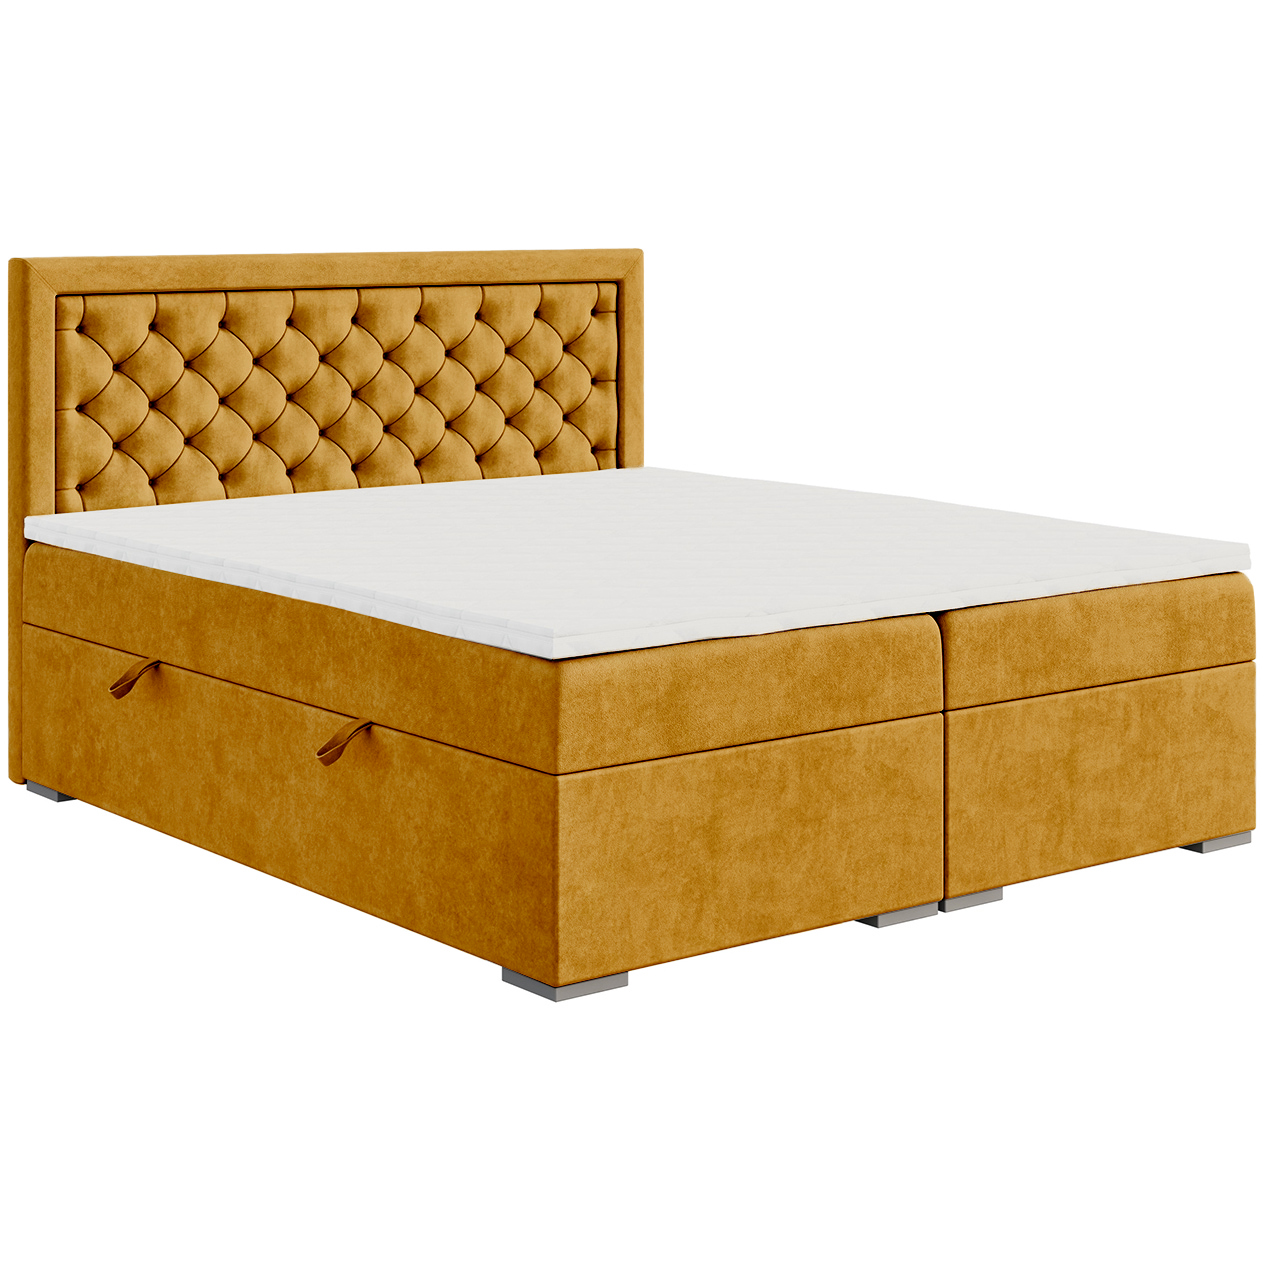 Upholstered bed BLUM 120x200 riviera 41